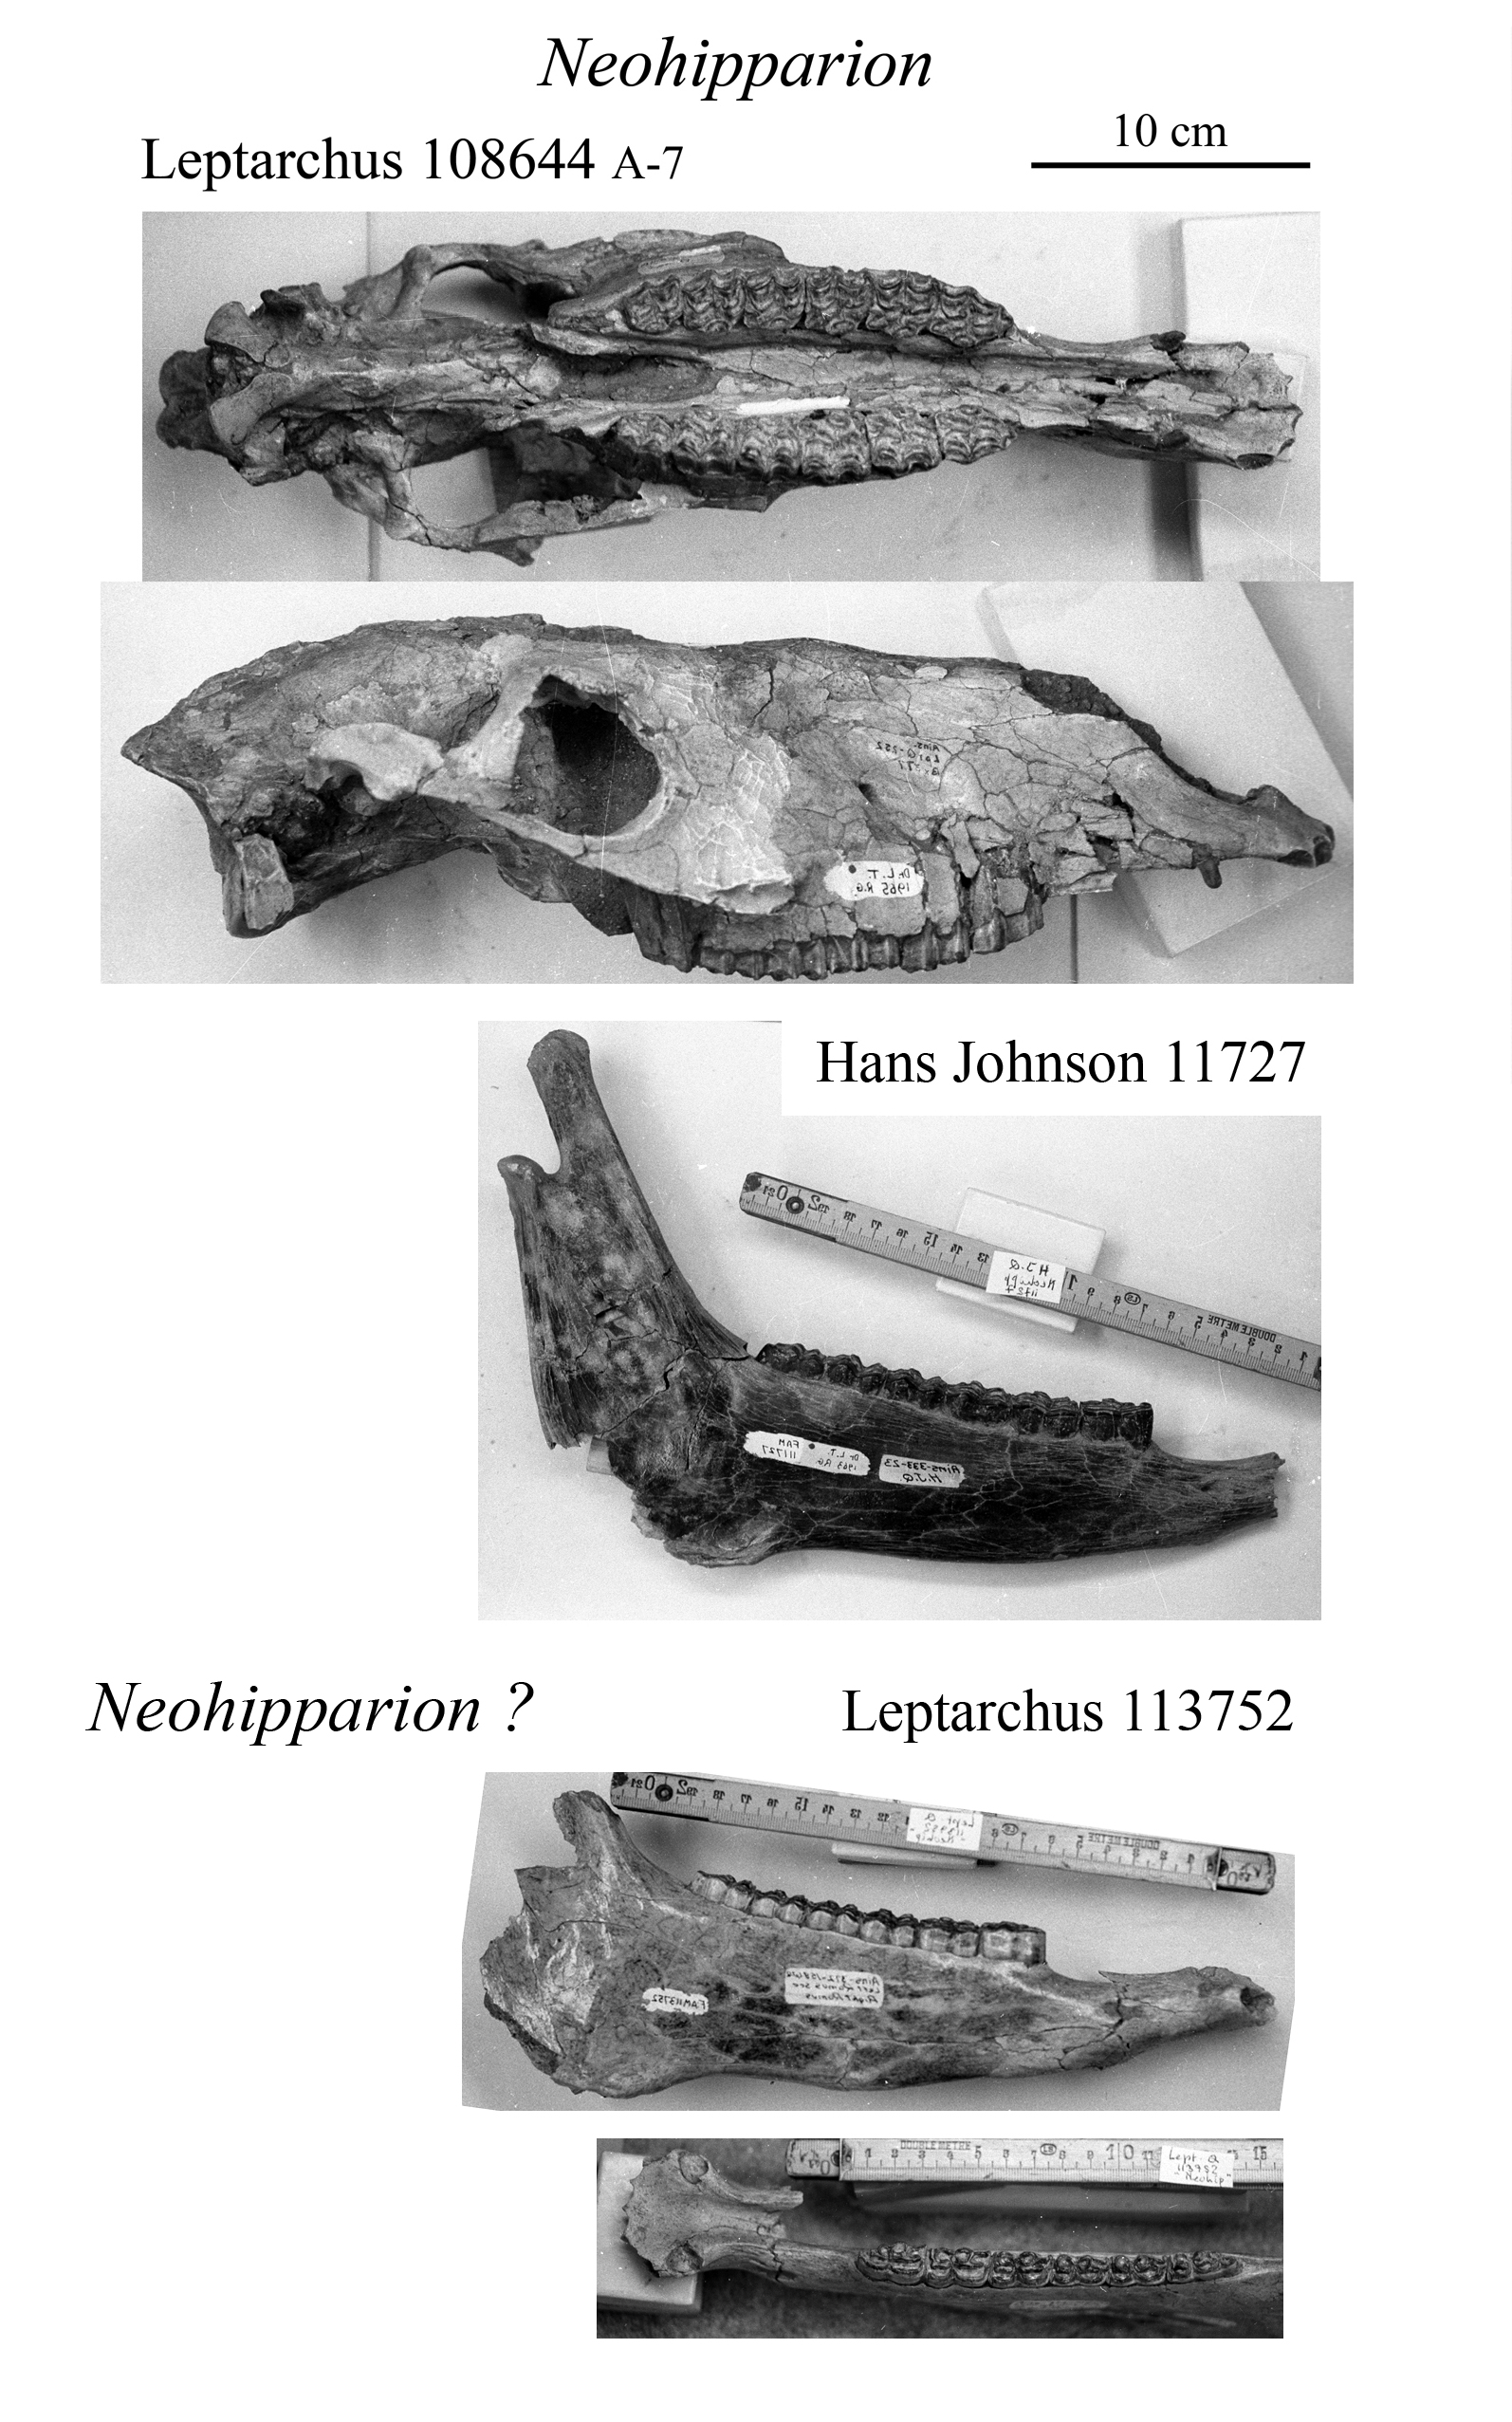 Neohipparion skull and mandibles